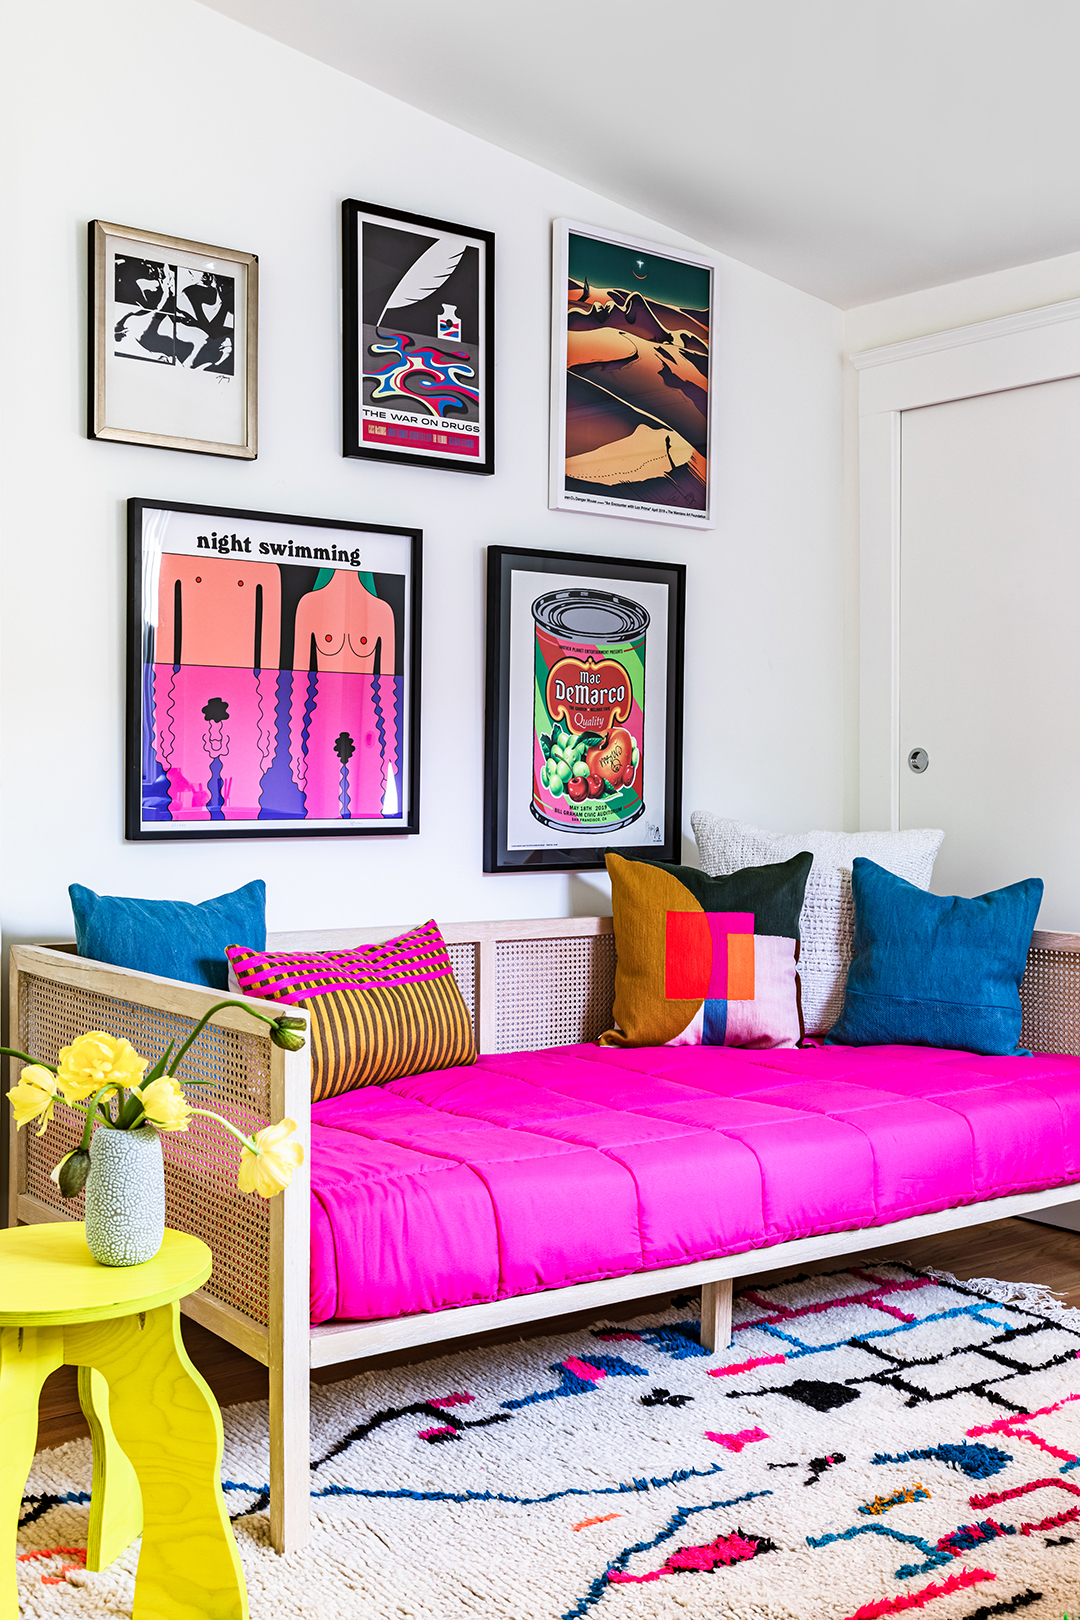 Guest room with bright pink comforter on day bed